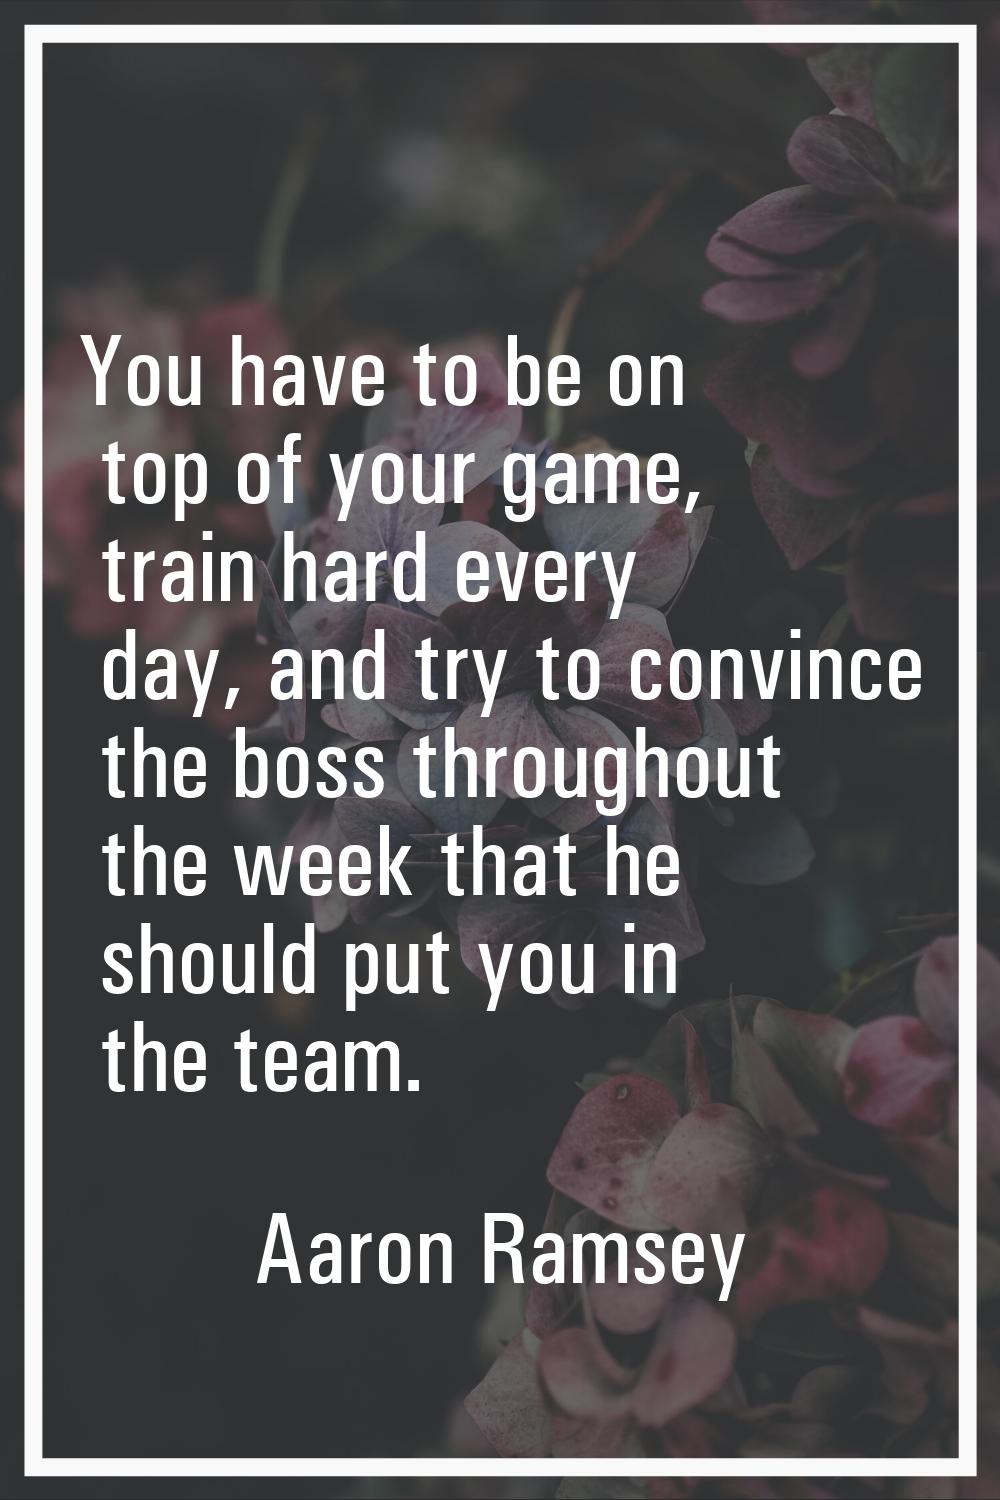 You have to be on top of your game, train hard every day, and try to convince the boss throughout t